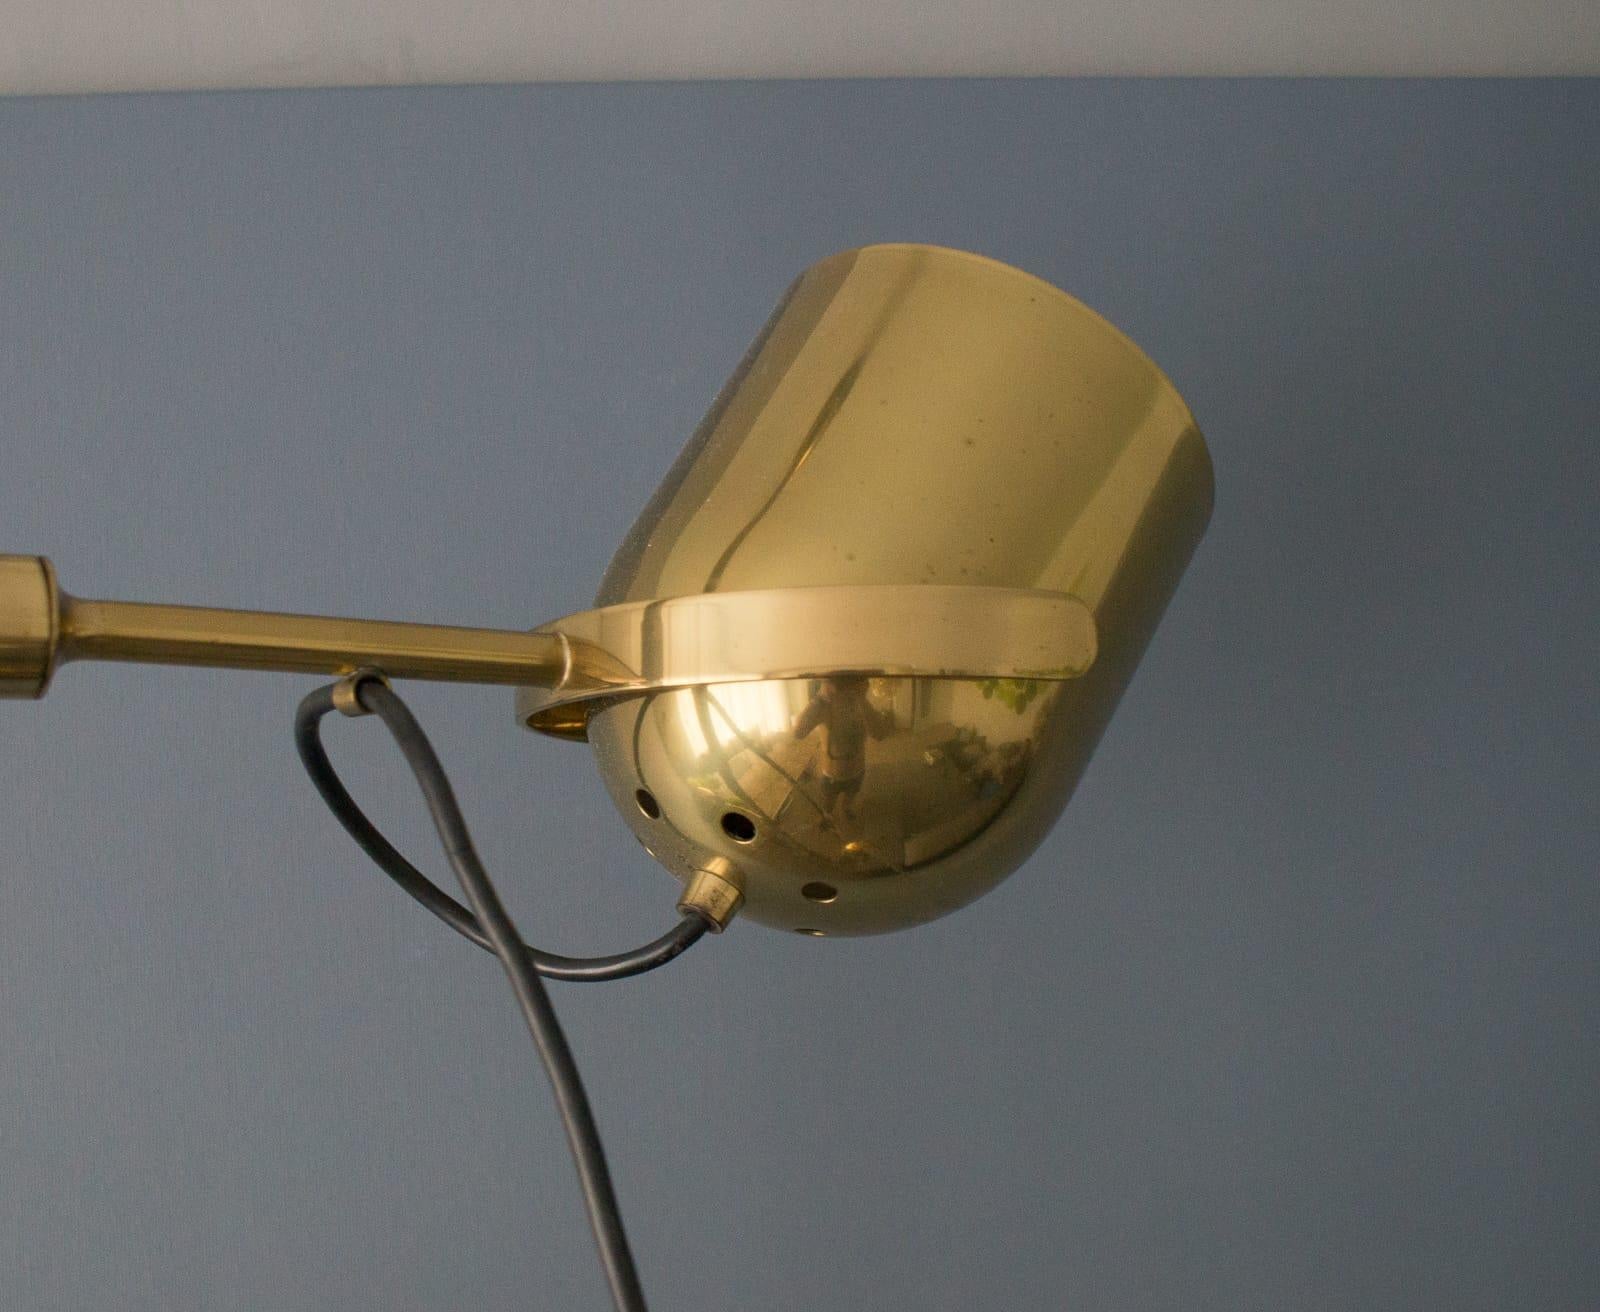 Extremly Rare Brass Tension Lamp from Florian Schulz, Model S 100 3